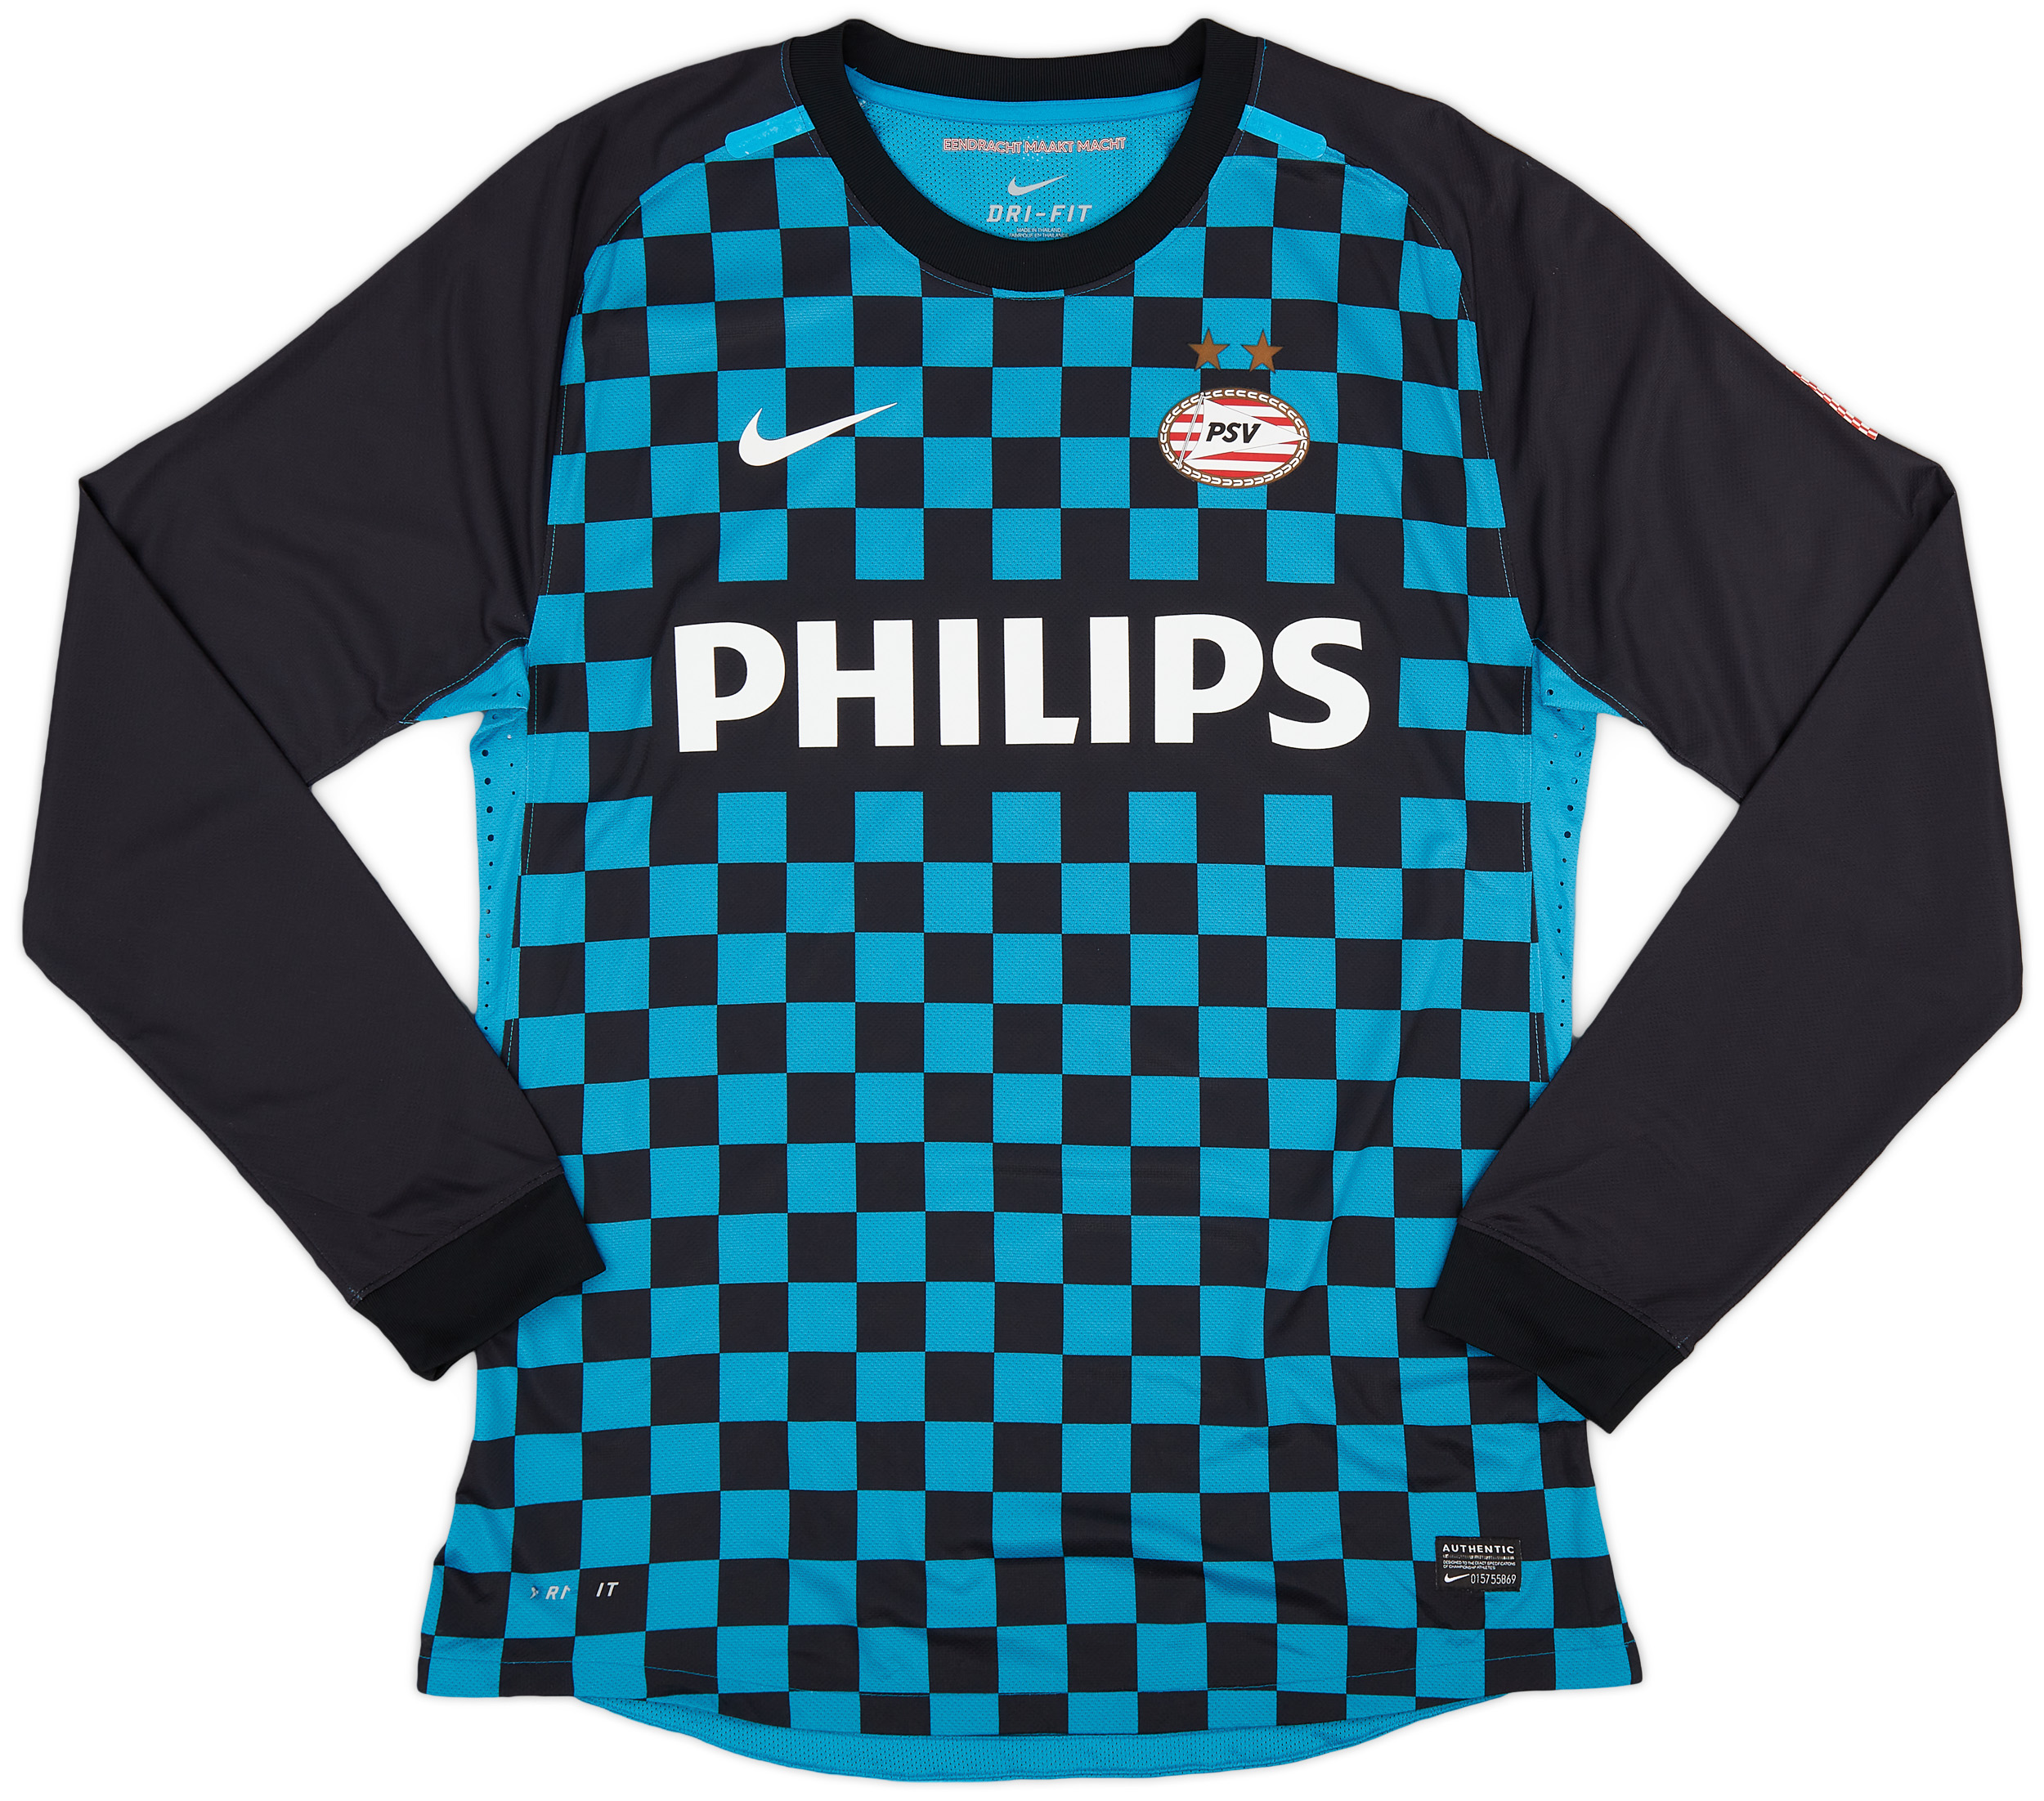 2011-13 PSV Player Issue Away Shirt - 8/10 - ()